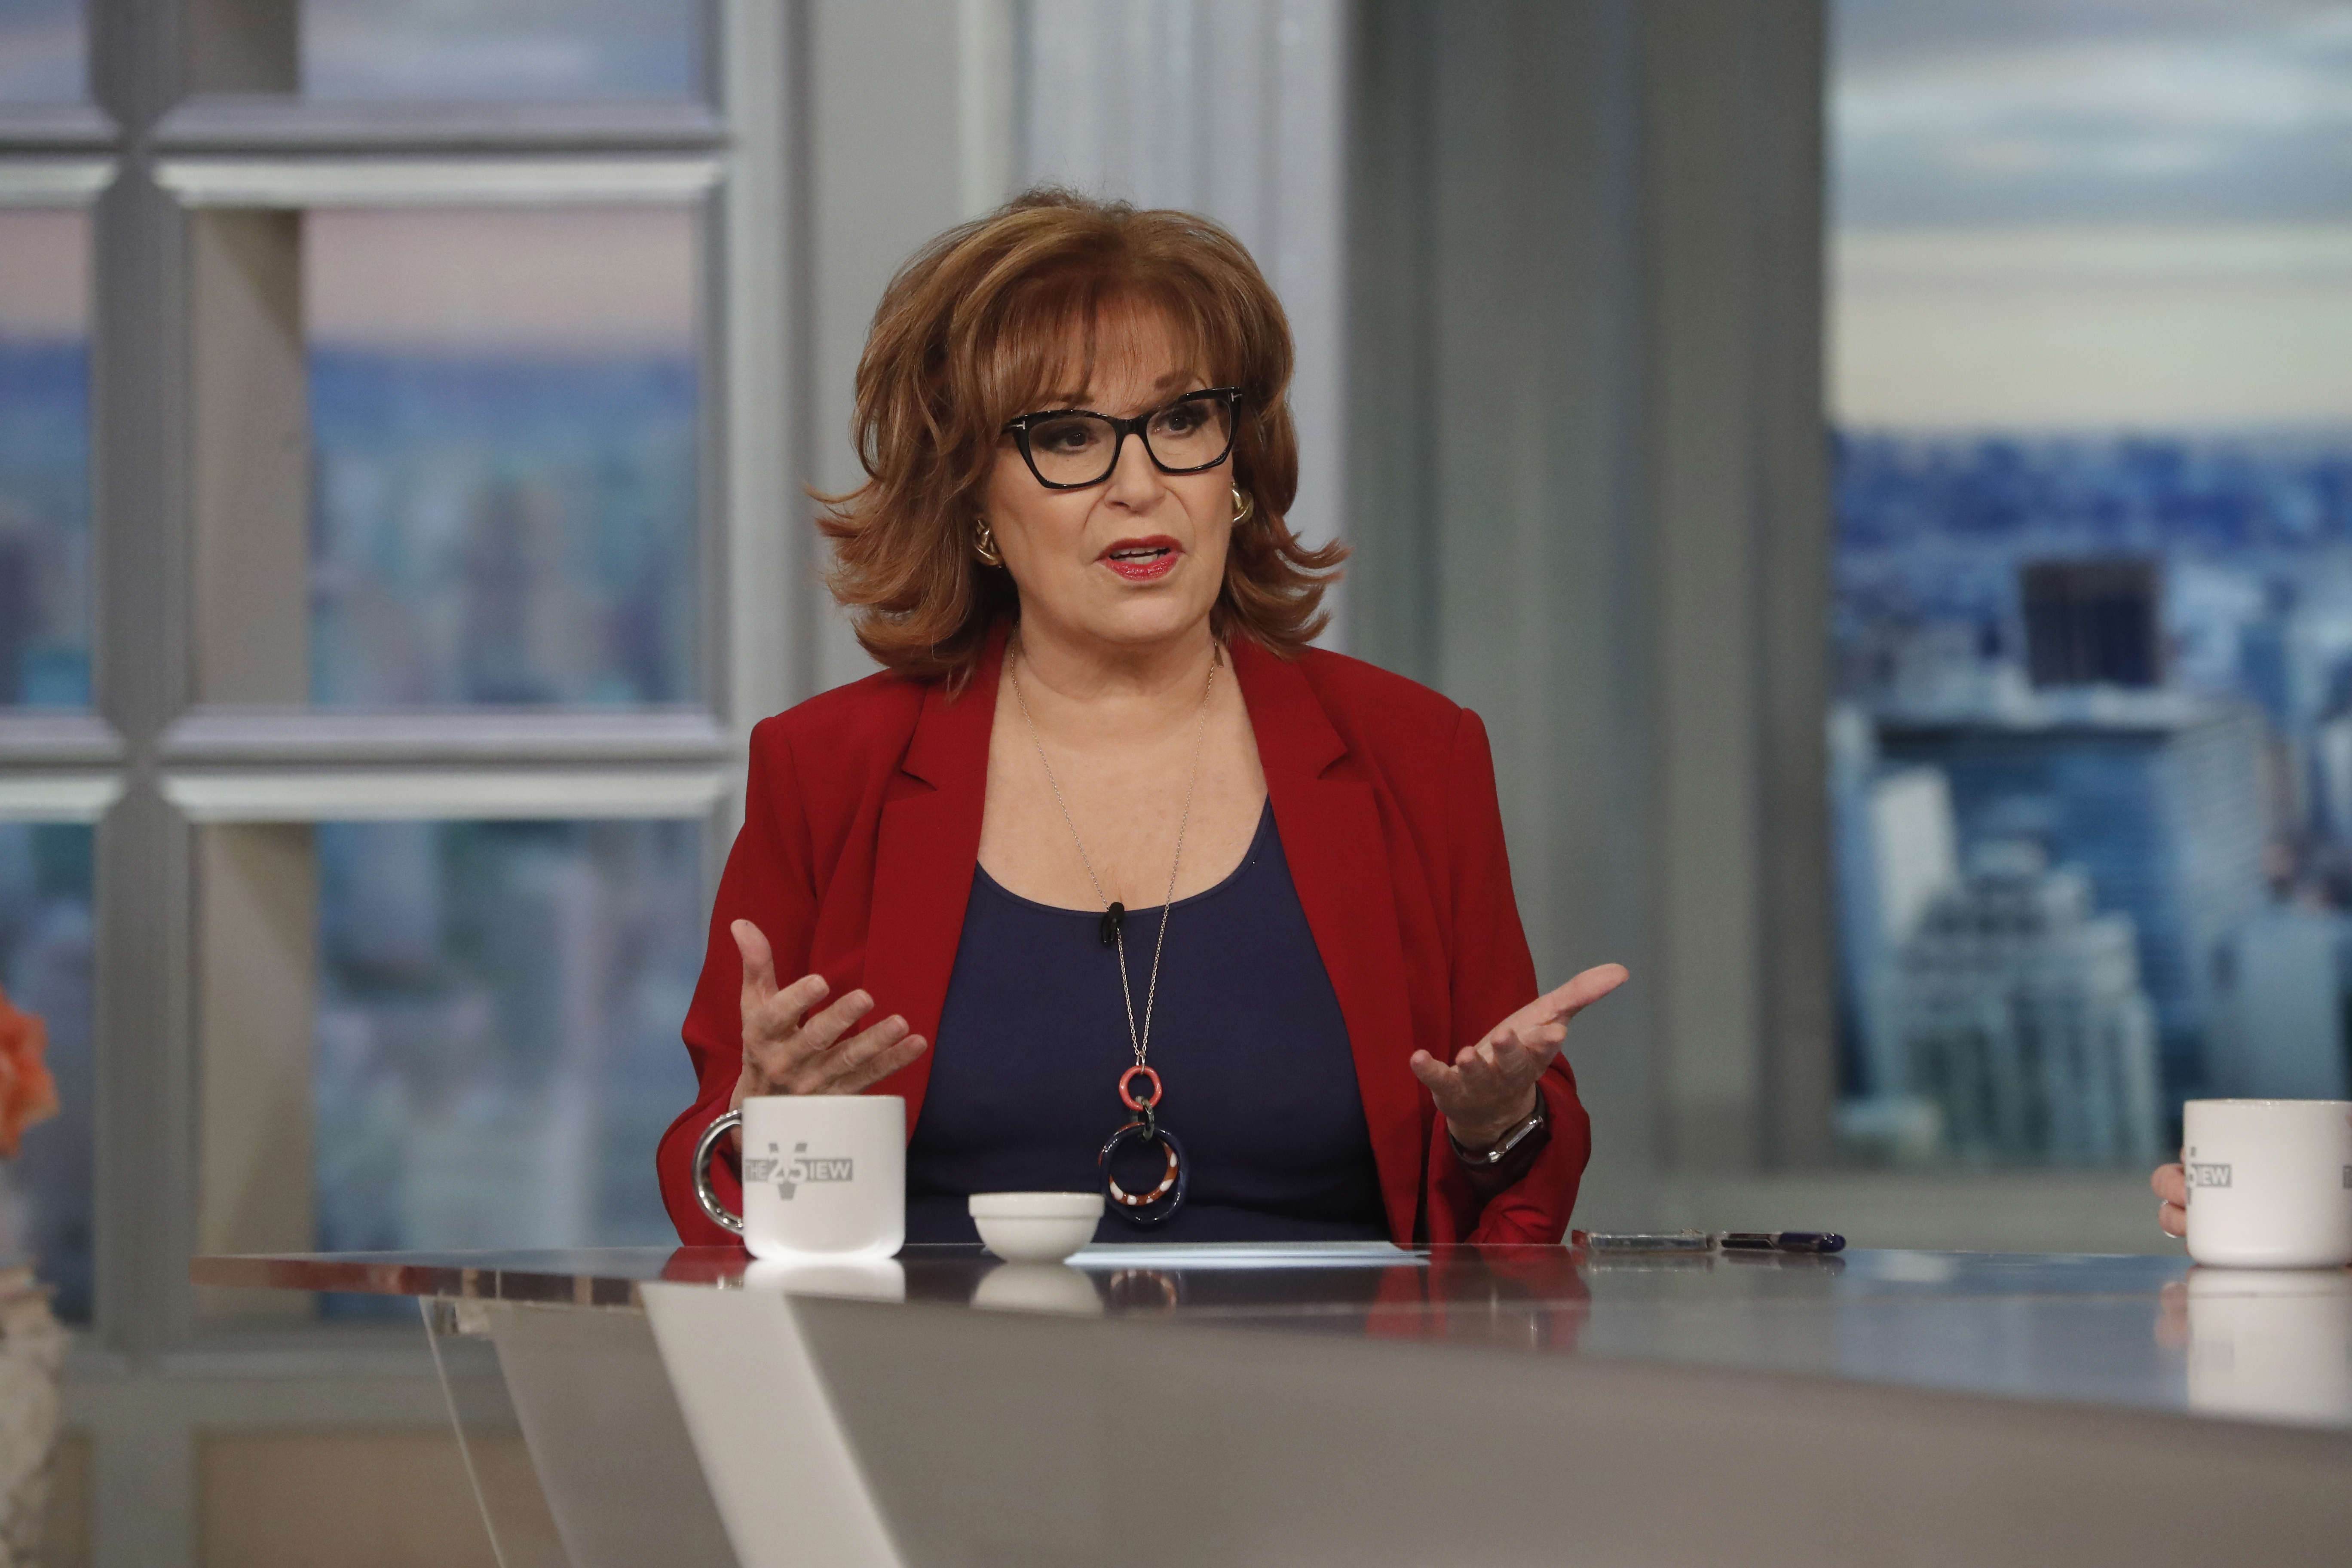 Joy Behar on "The View" on May 6, 2022. | Source: Getty Images